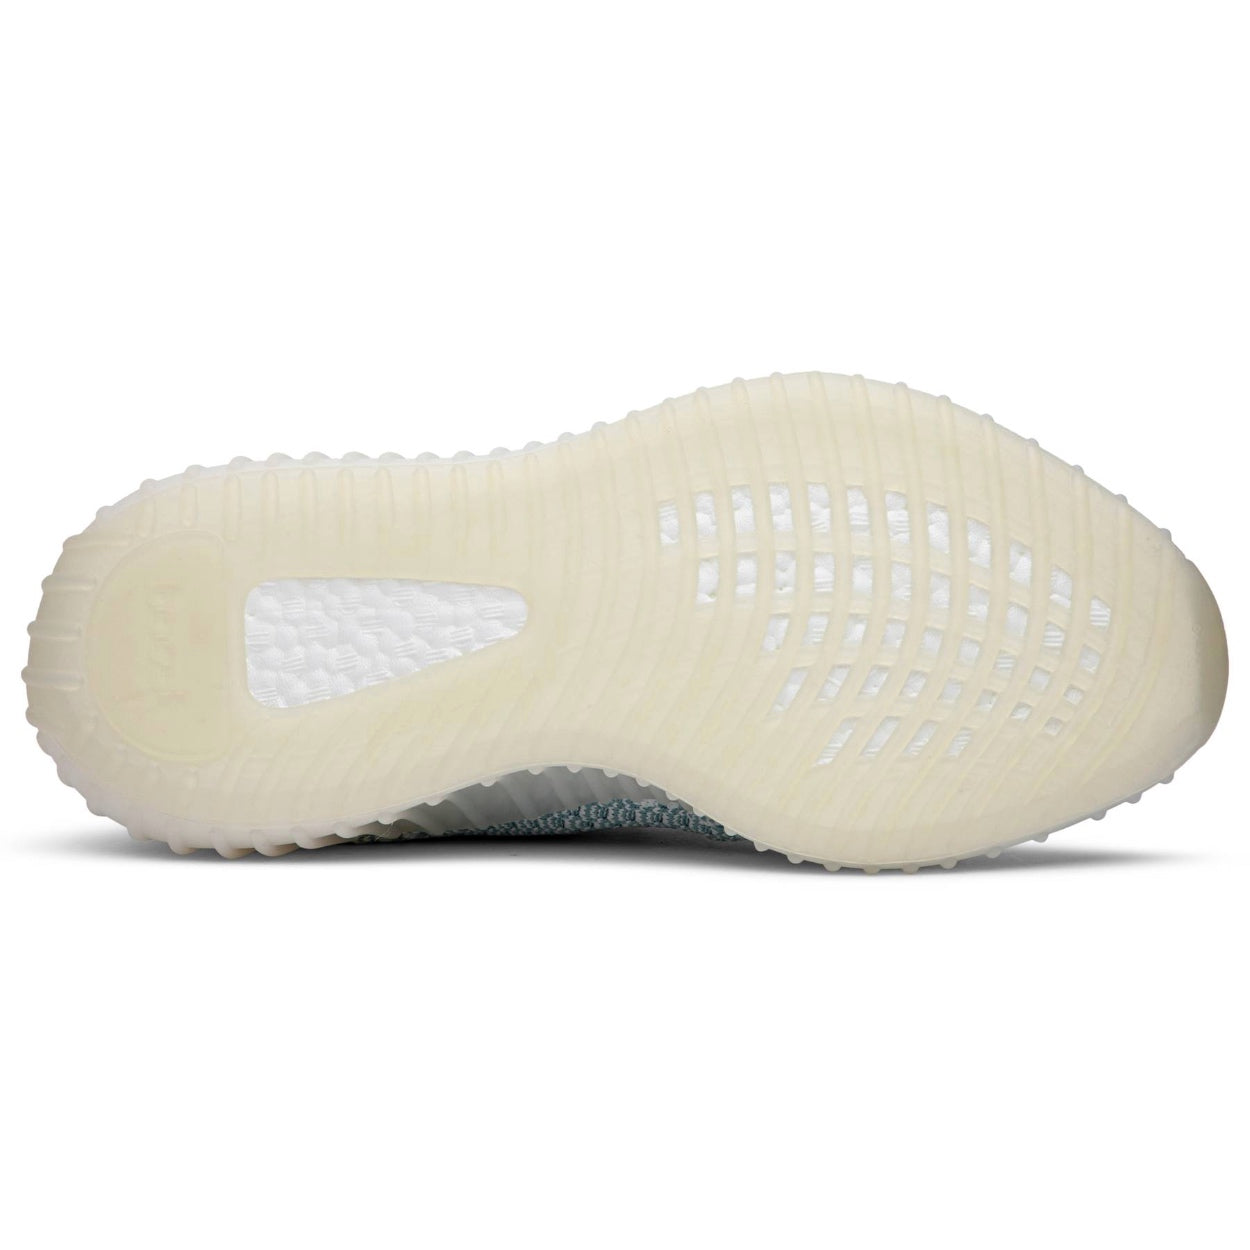 adidas Yeezy Boost 350 V2 'Cloud White Non-Reflective' - After Burn